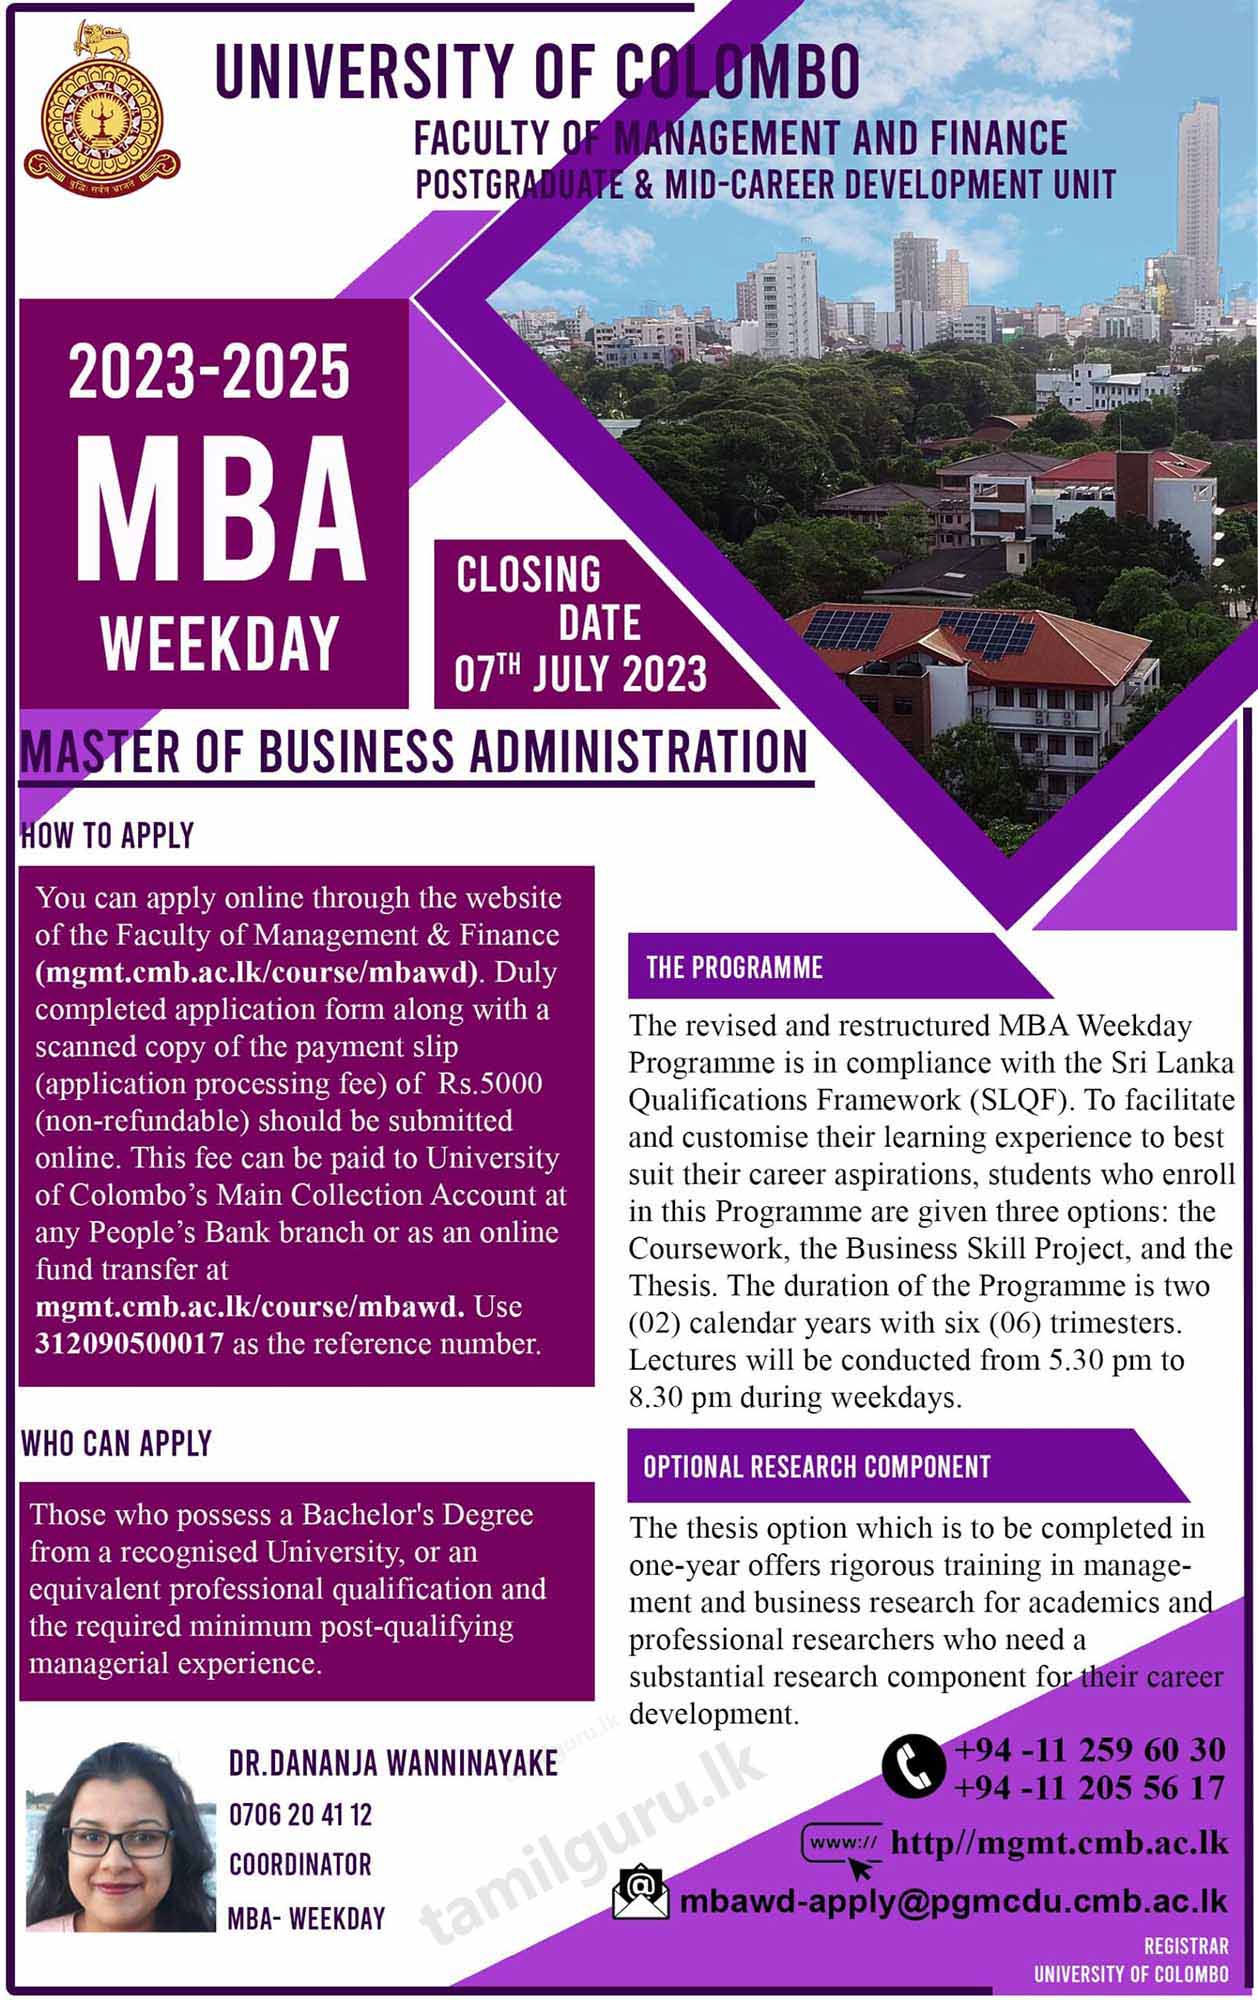 Master of Business Administration (MBA) Weekday Programme (2023-25) - University of Colombo